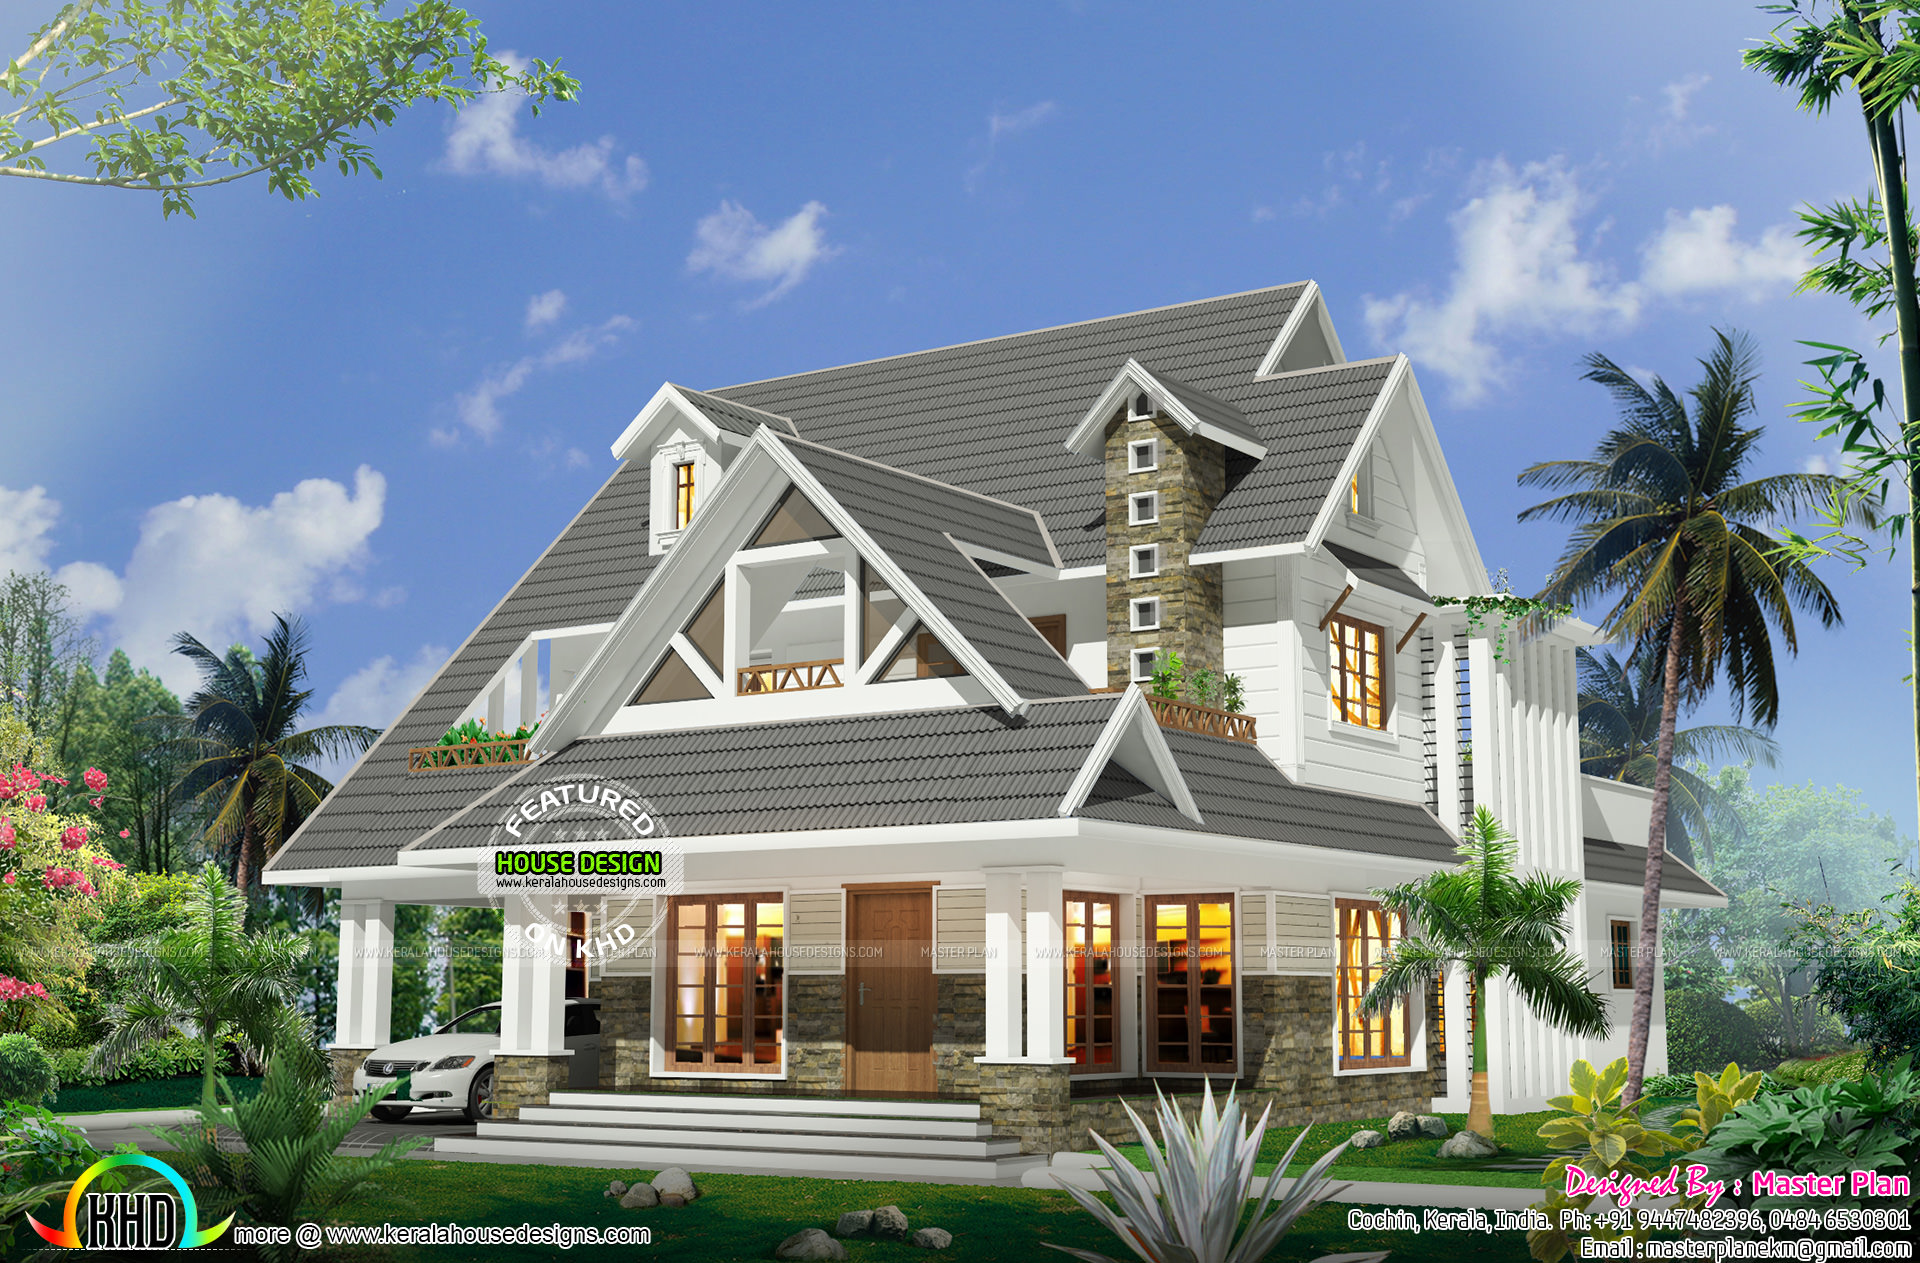 Mix traditional modern mix European look home - Kerala Home Design and  Floor Plans - 9K+ Dream Houses